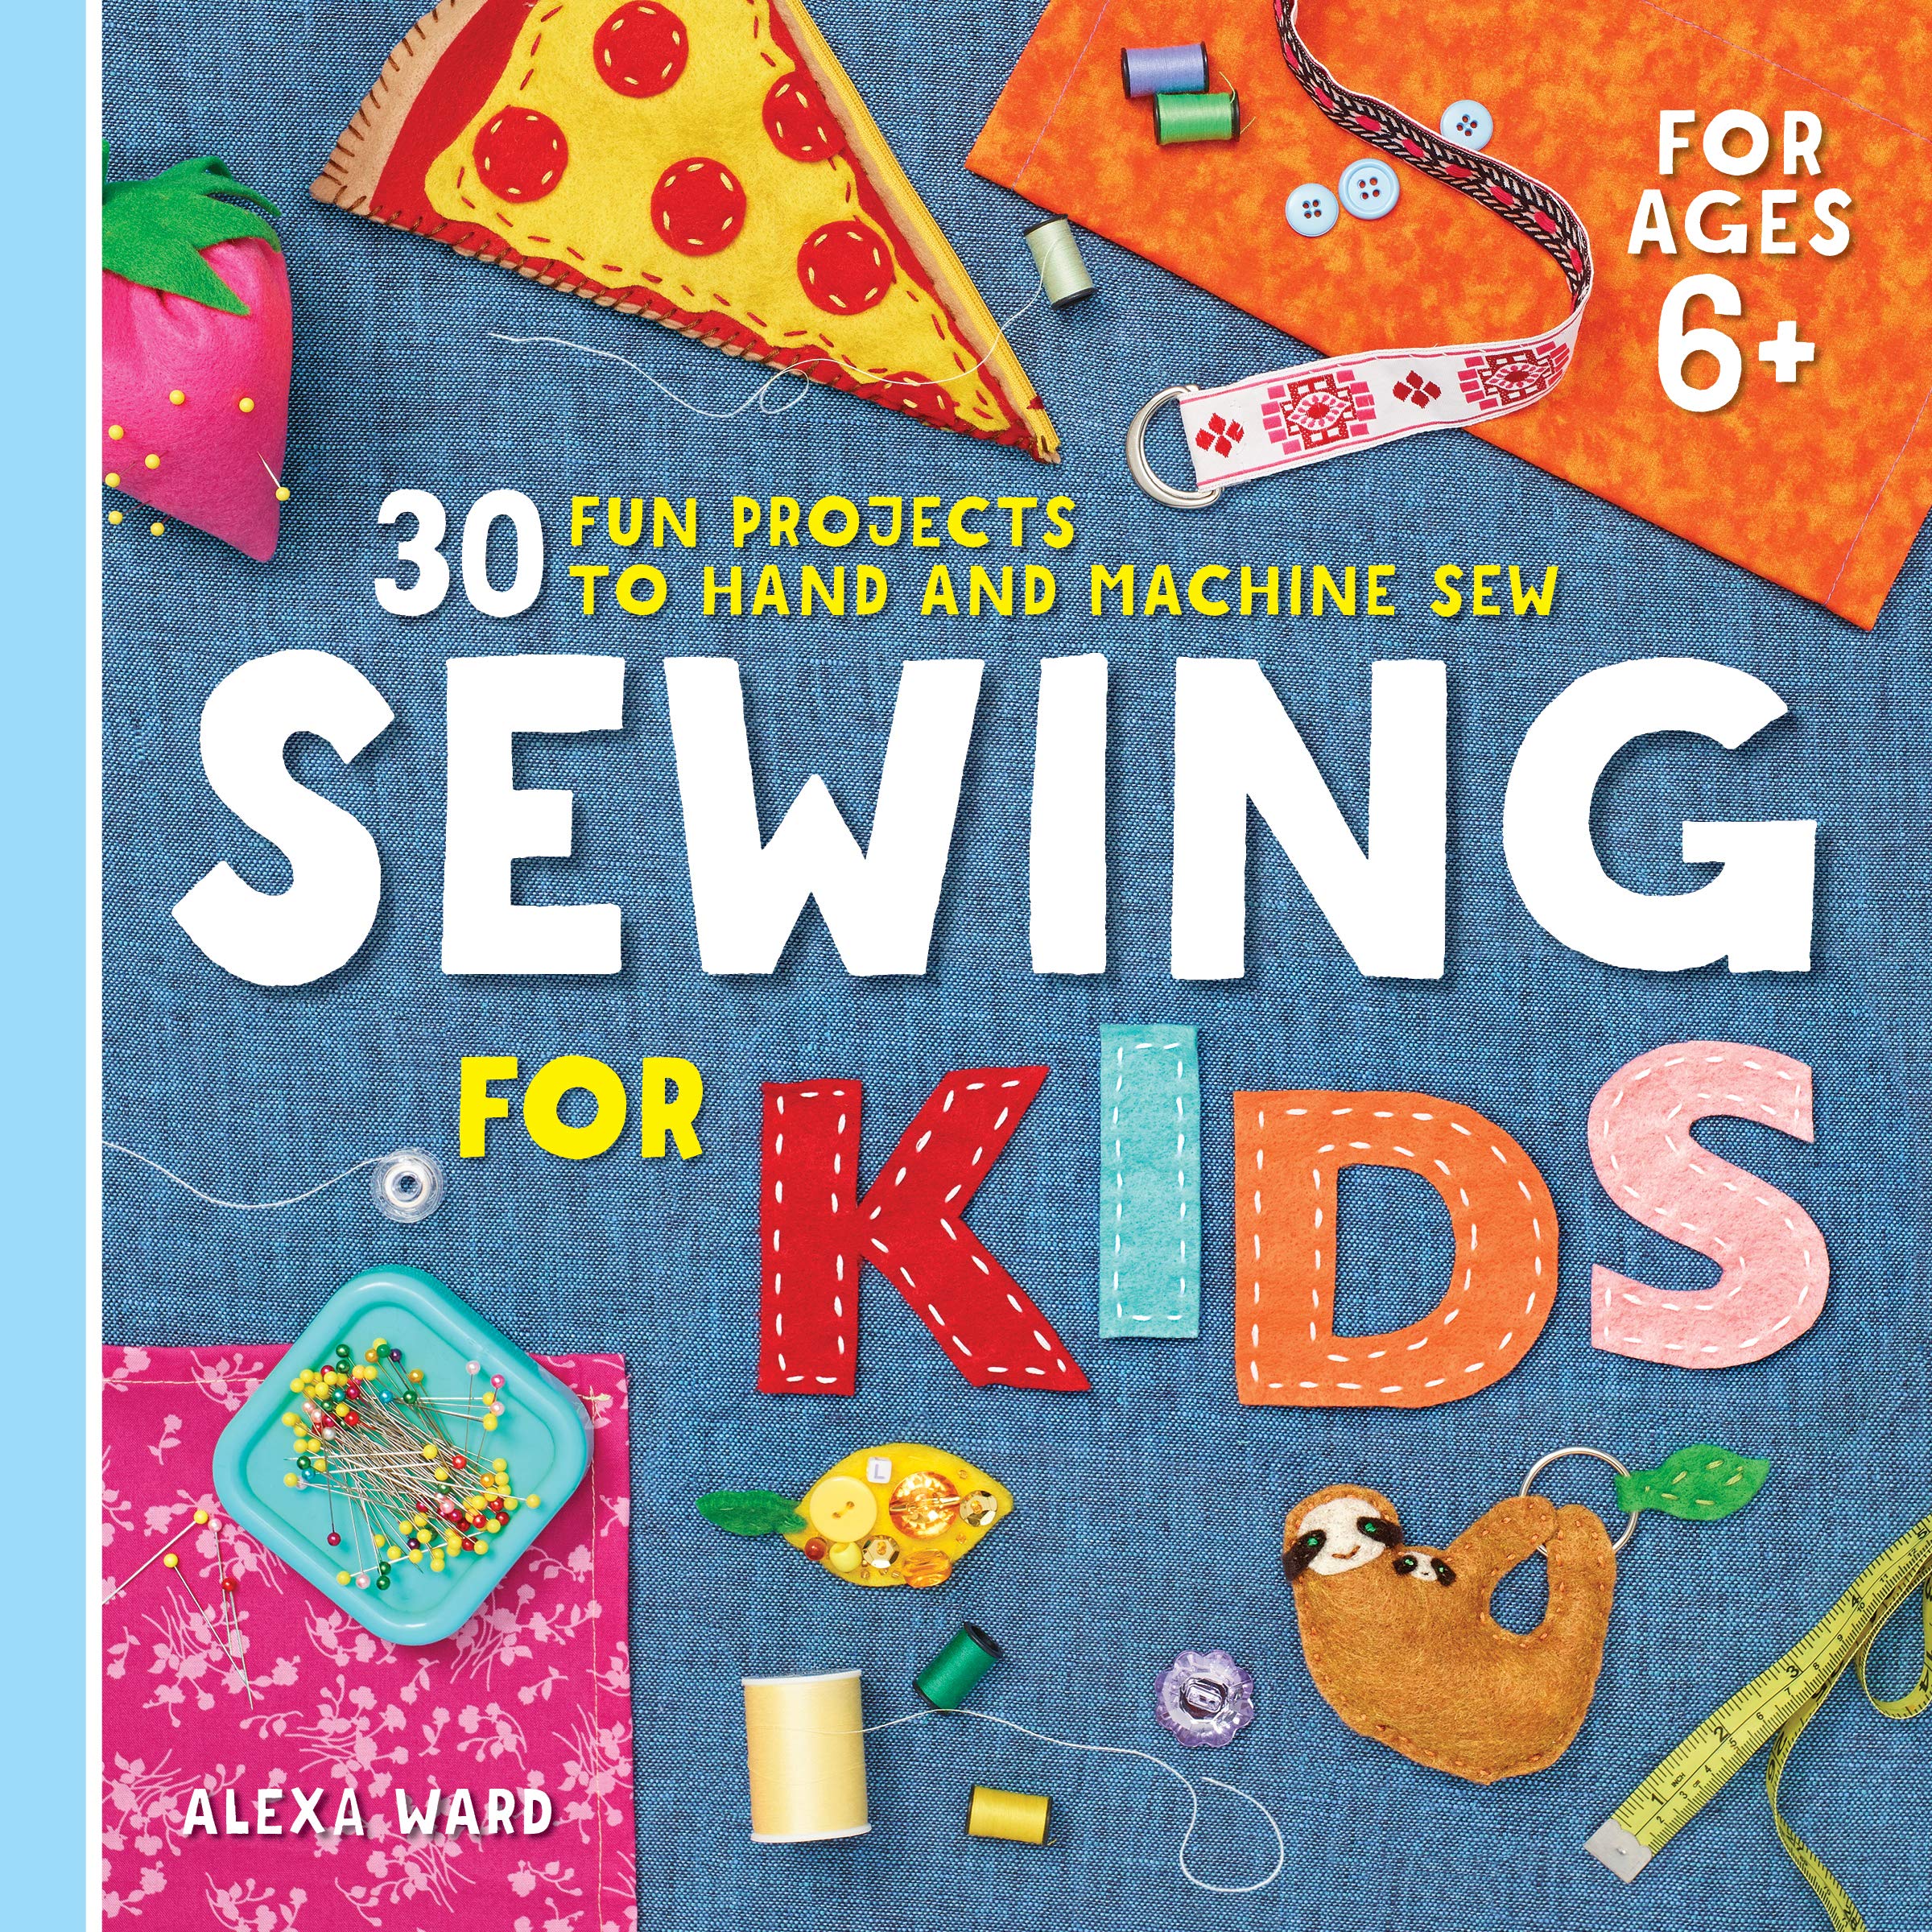 Sewing for kids